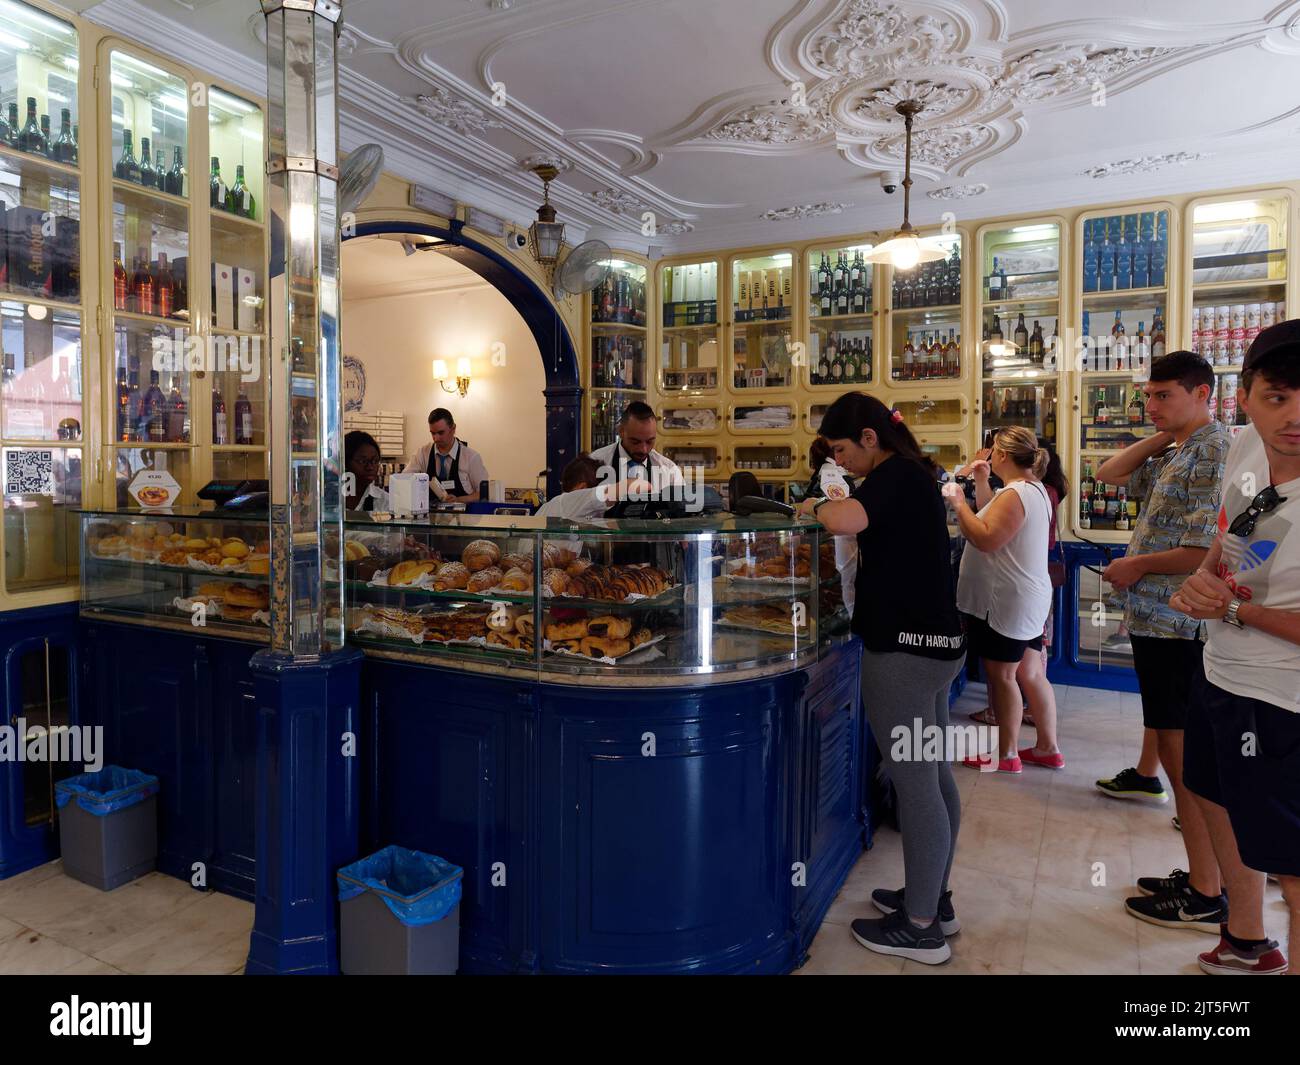 People queue in the interior of the famous Pasteis de Belem shop in the Belem district of Lisbon, Portugal. Stock Photo